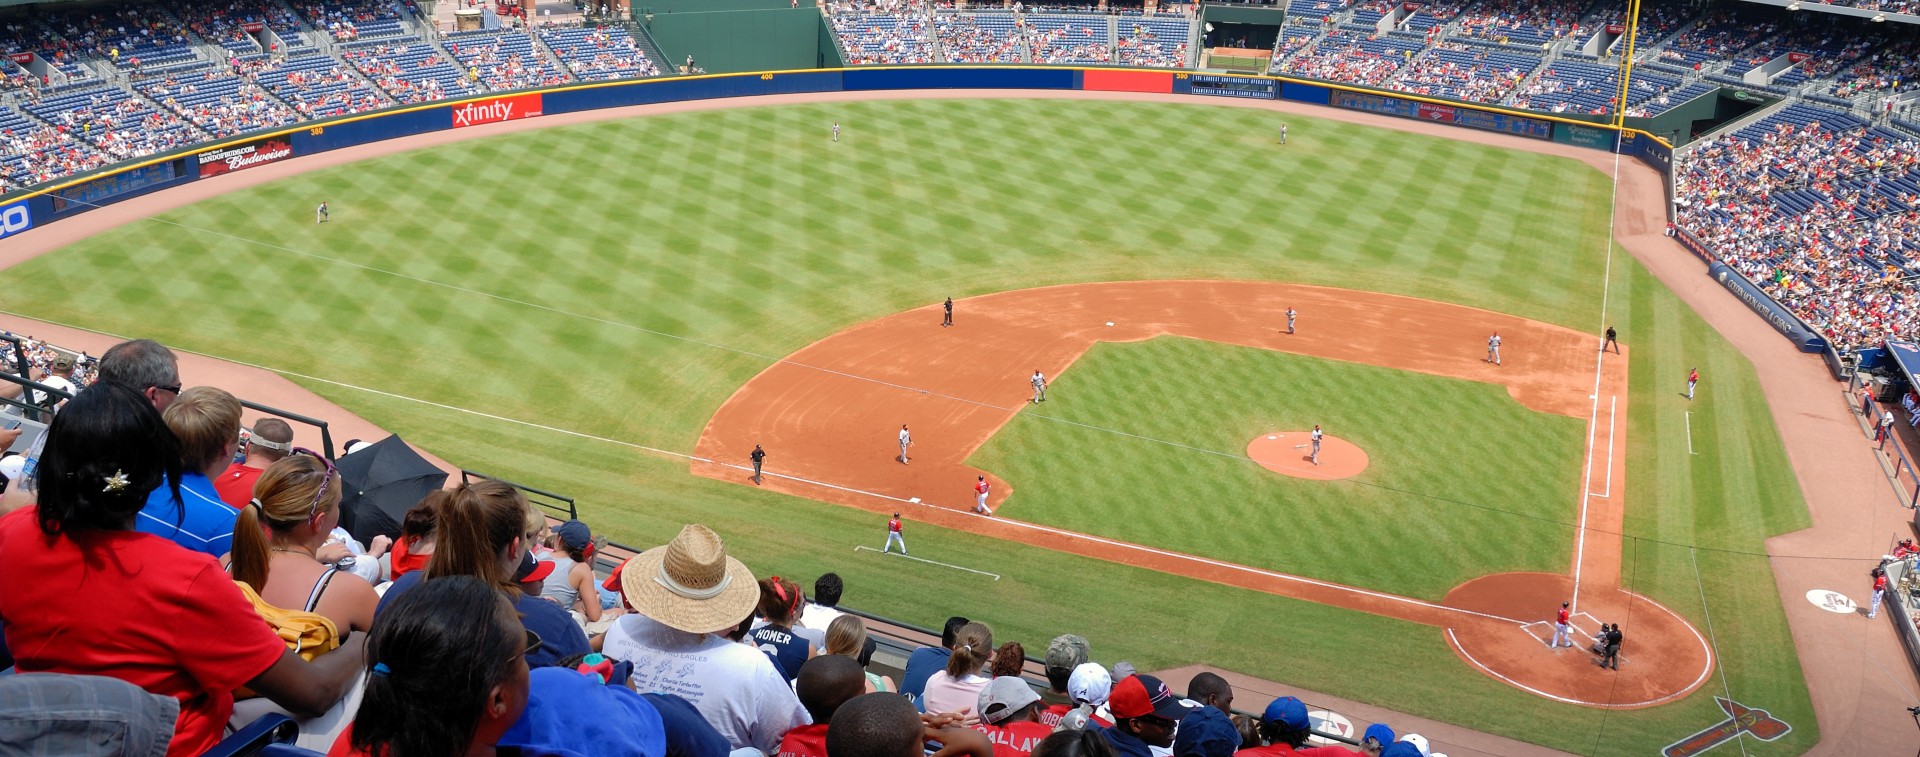 MLB Agreement Will Change World Series Home Field Advantage Requirement